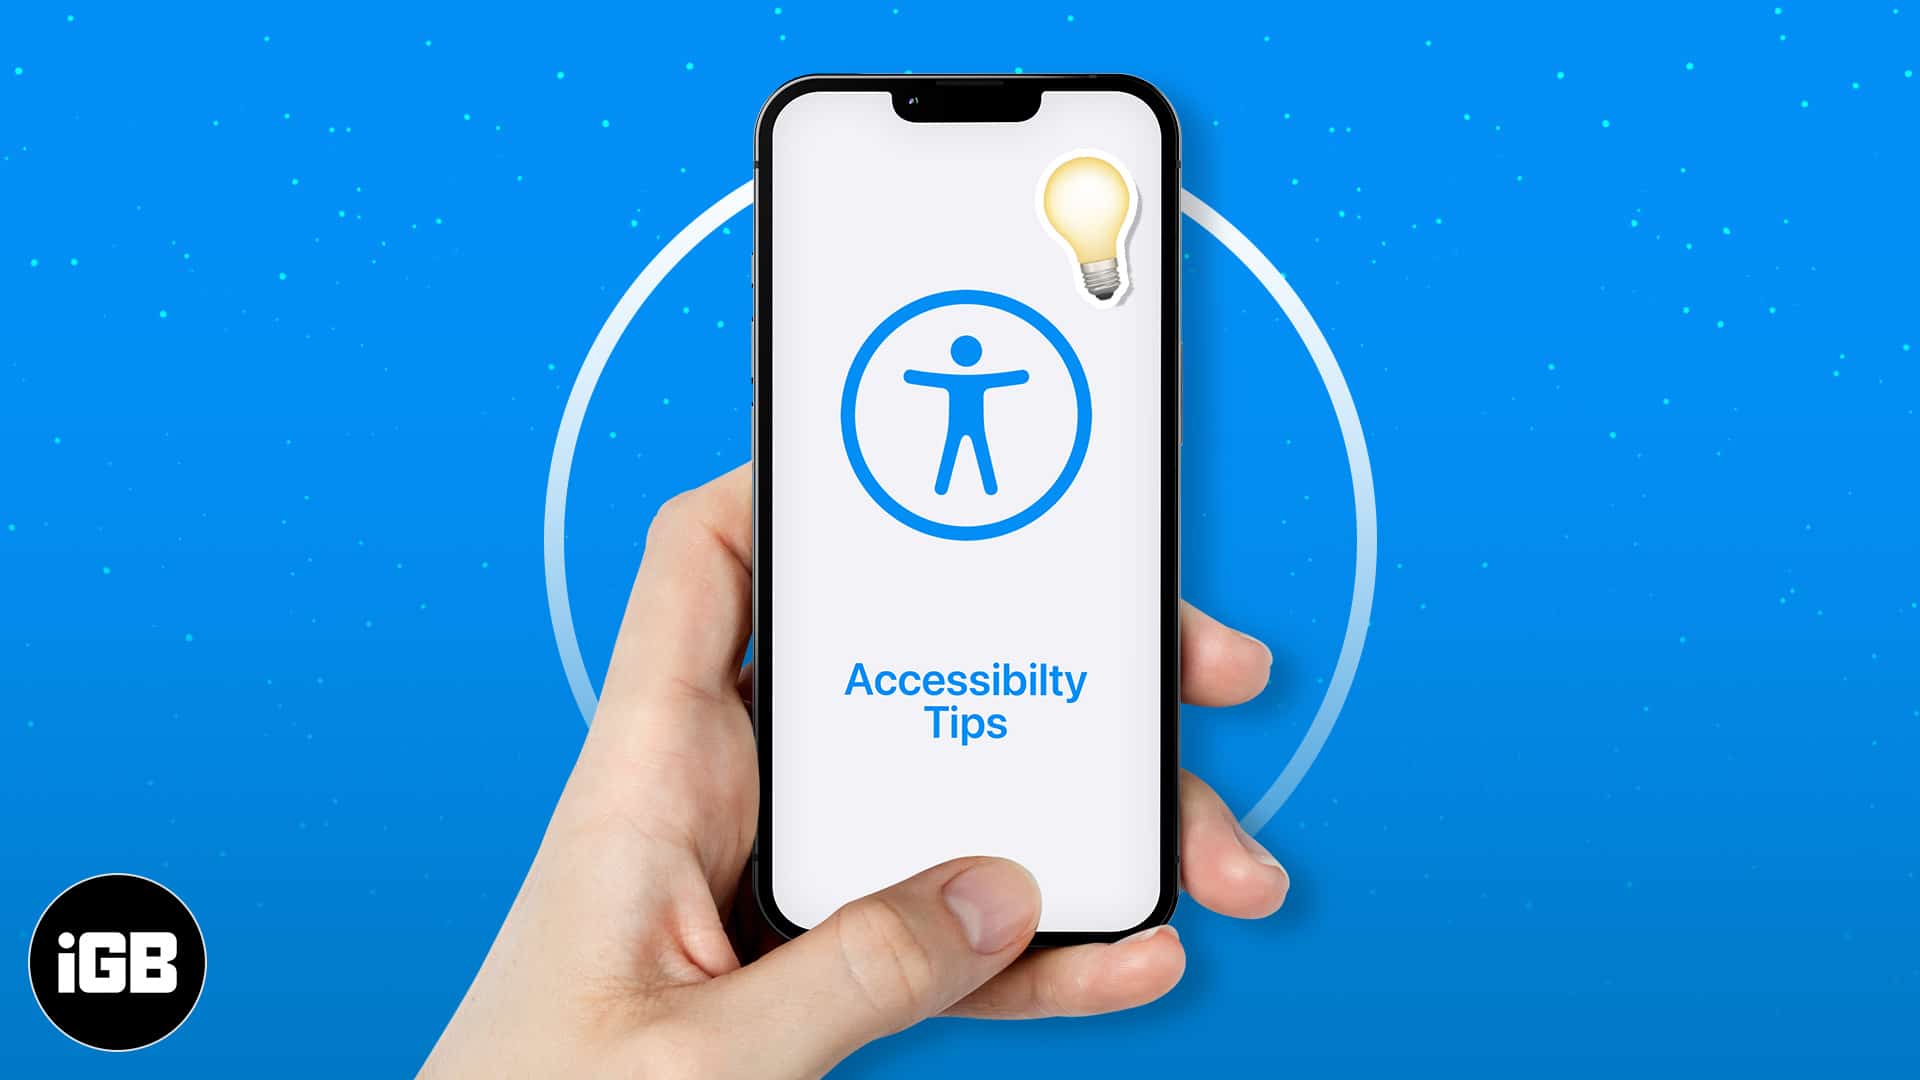 Best accessibility tips for iphone users